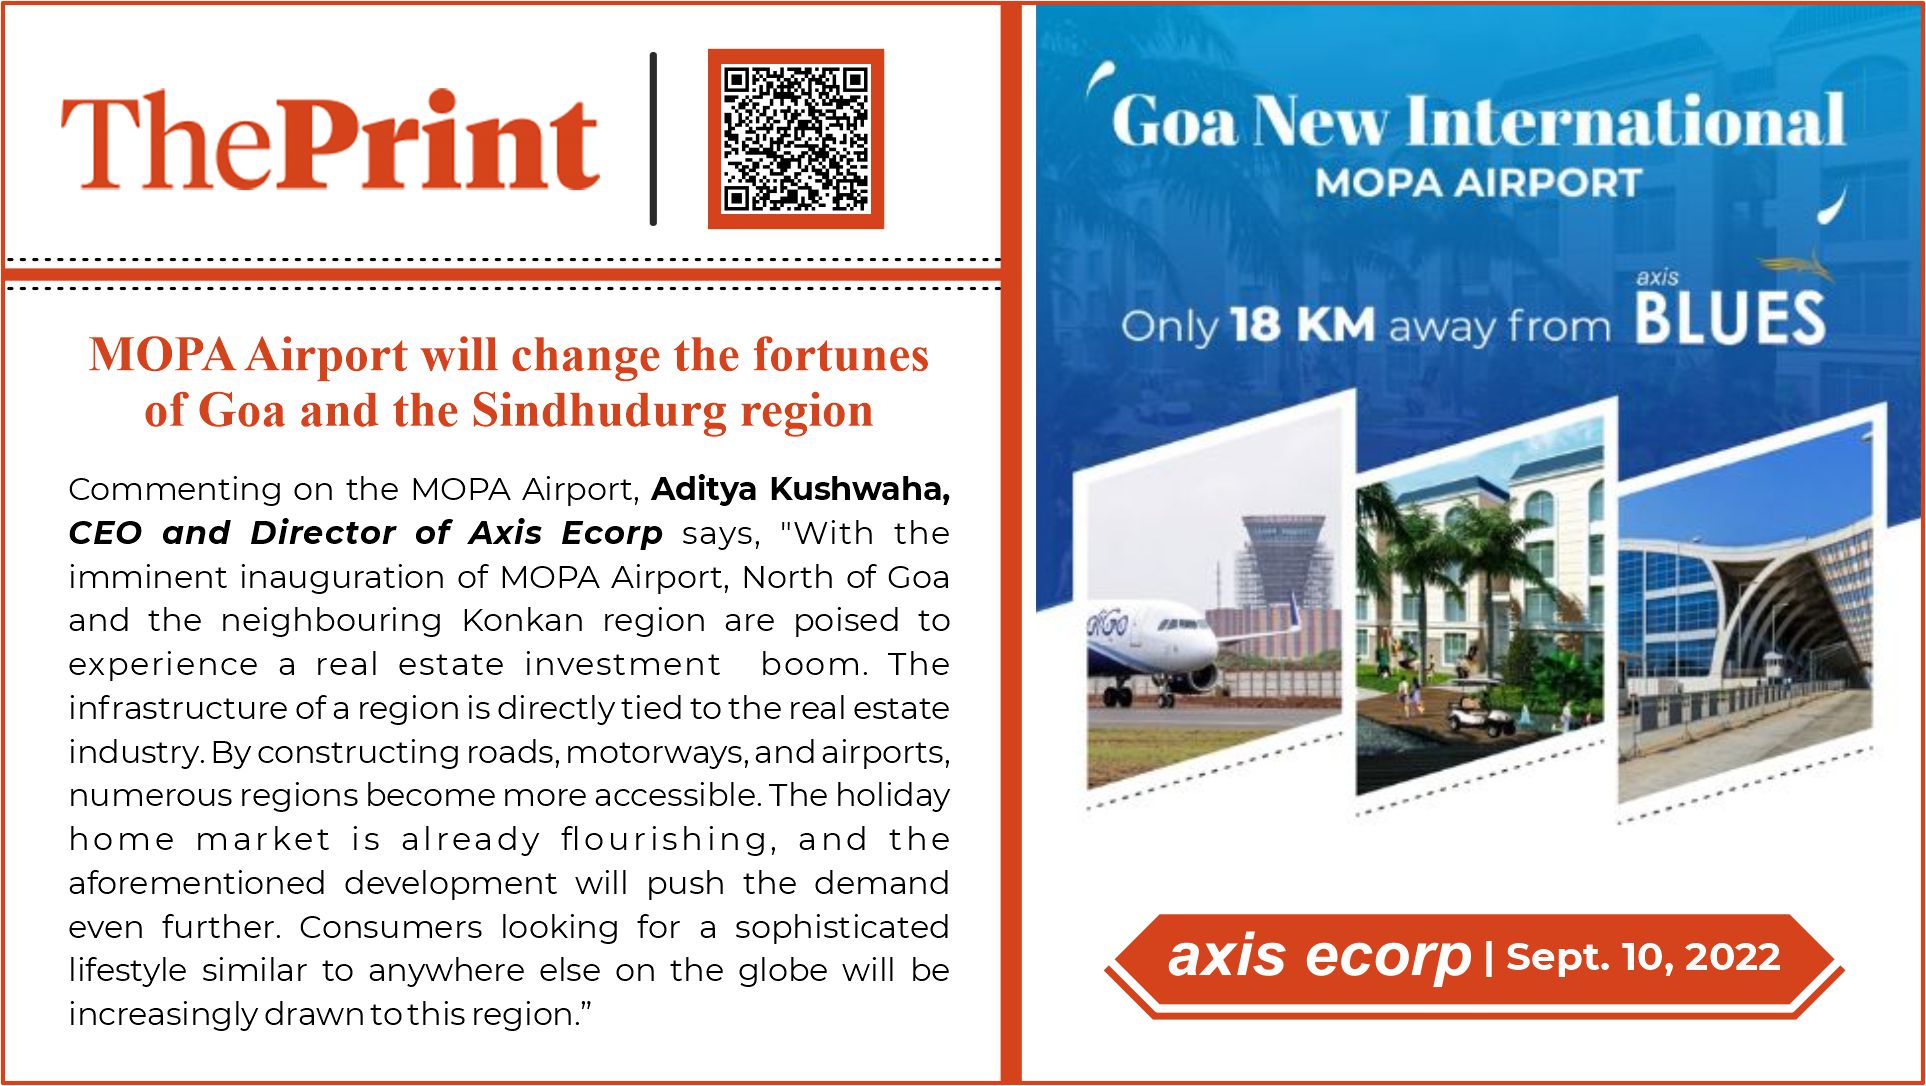 MOPA Airport will change the fortunes of Goa